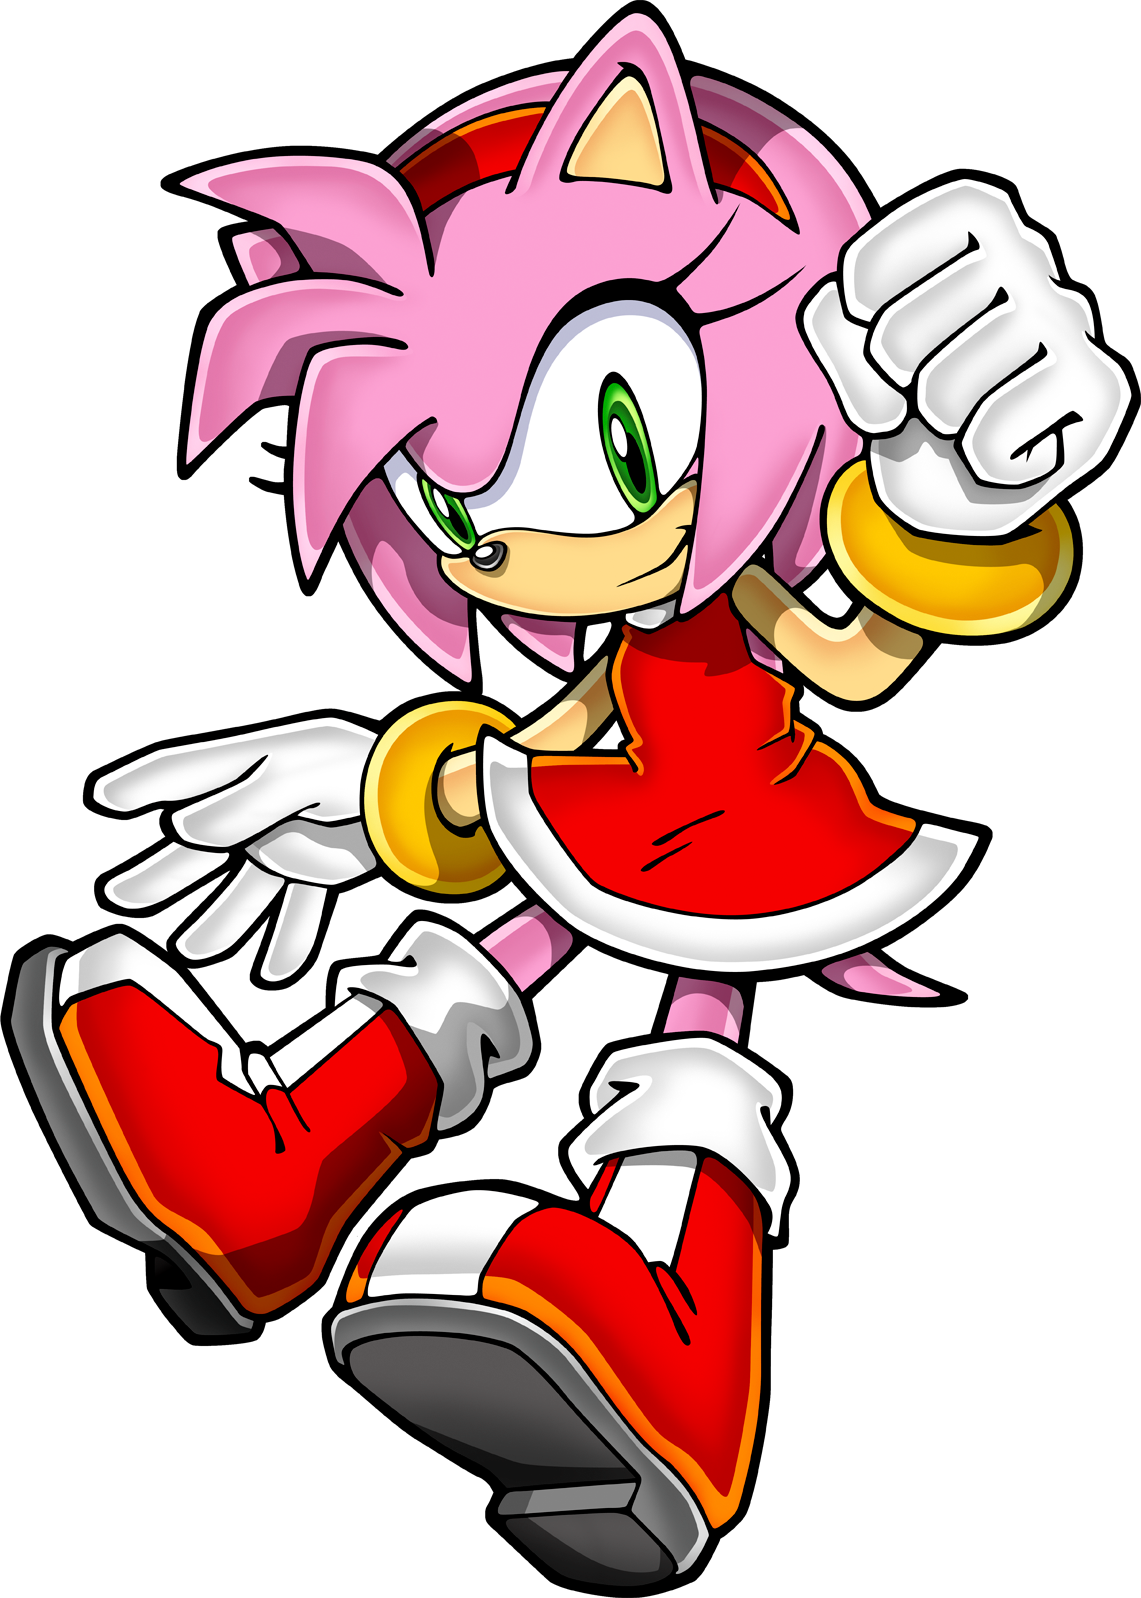 http://img1.wikia.nocookie.net/__cb20130810024830/sonic/es/images/8/82/Sonic-Channel-Amy-sonic-channel-31456057-1141-1598.png